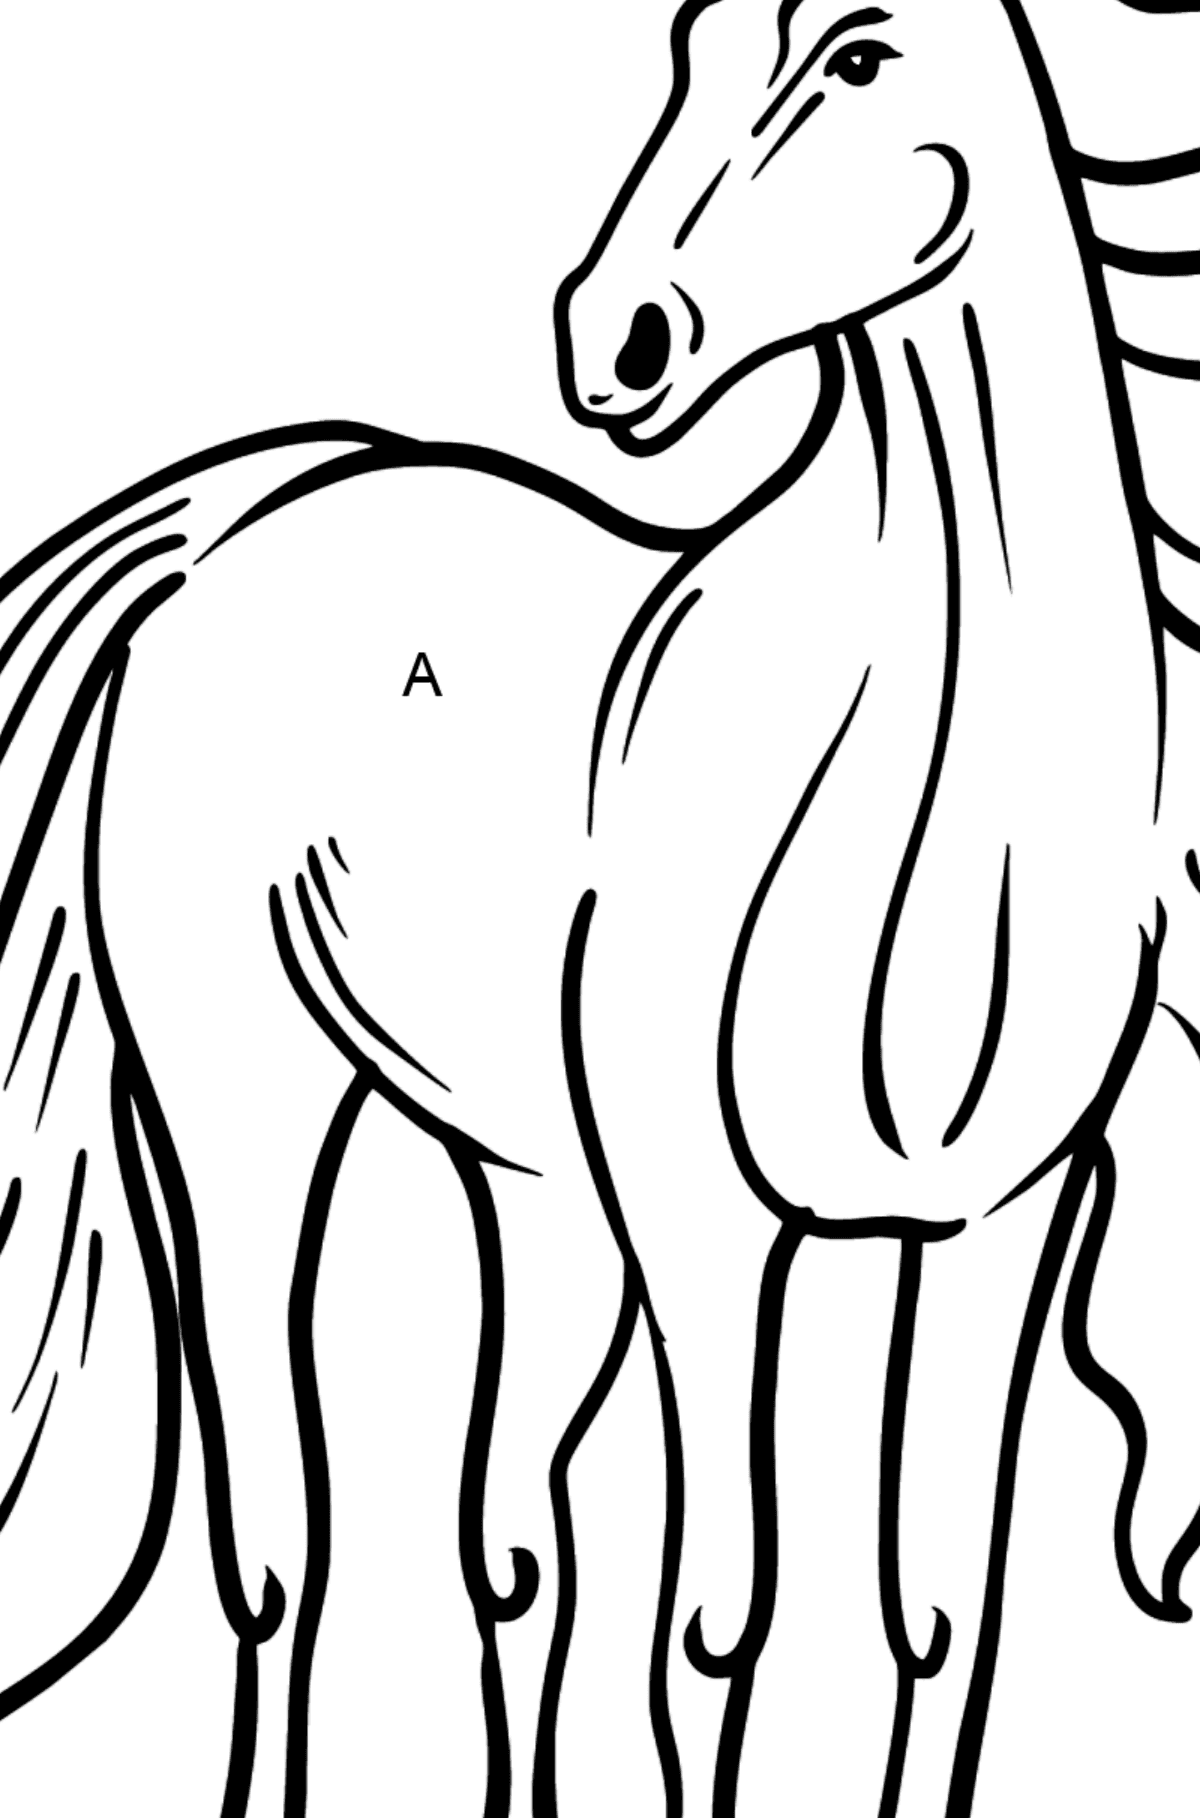 Horse coloring page - Coloring by Letters for Kids